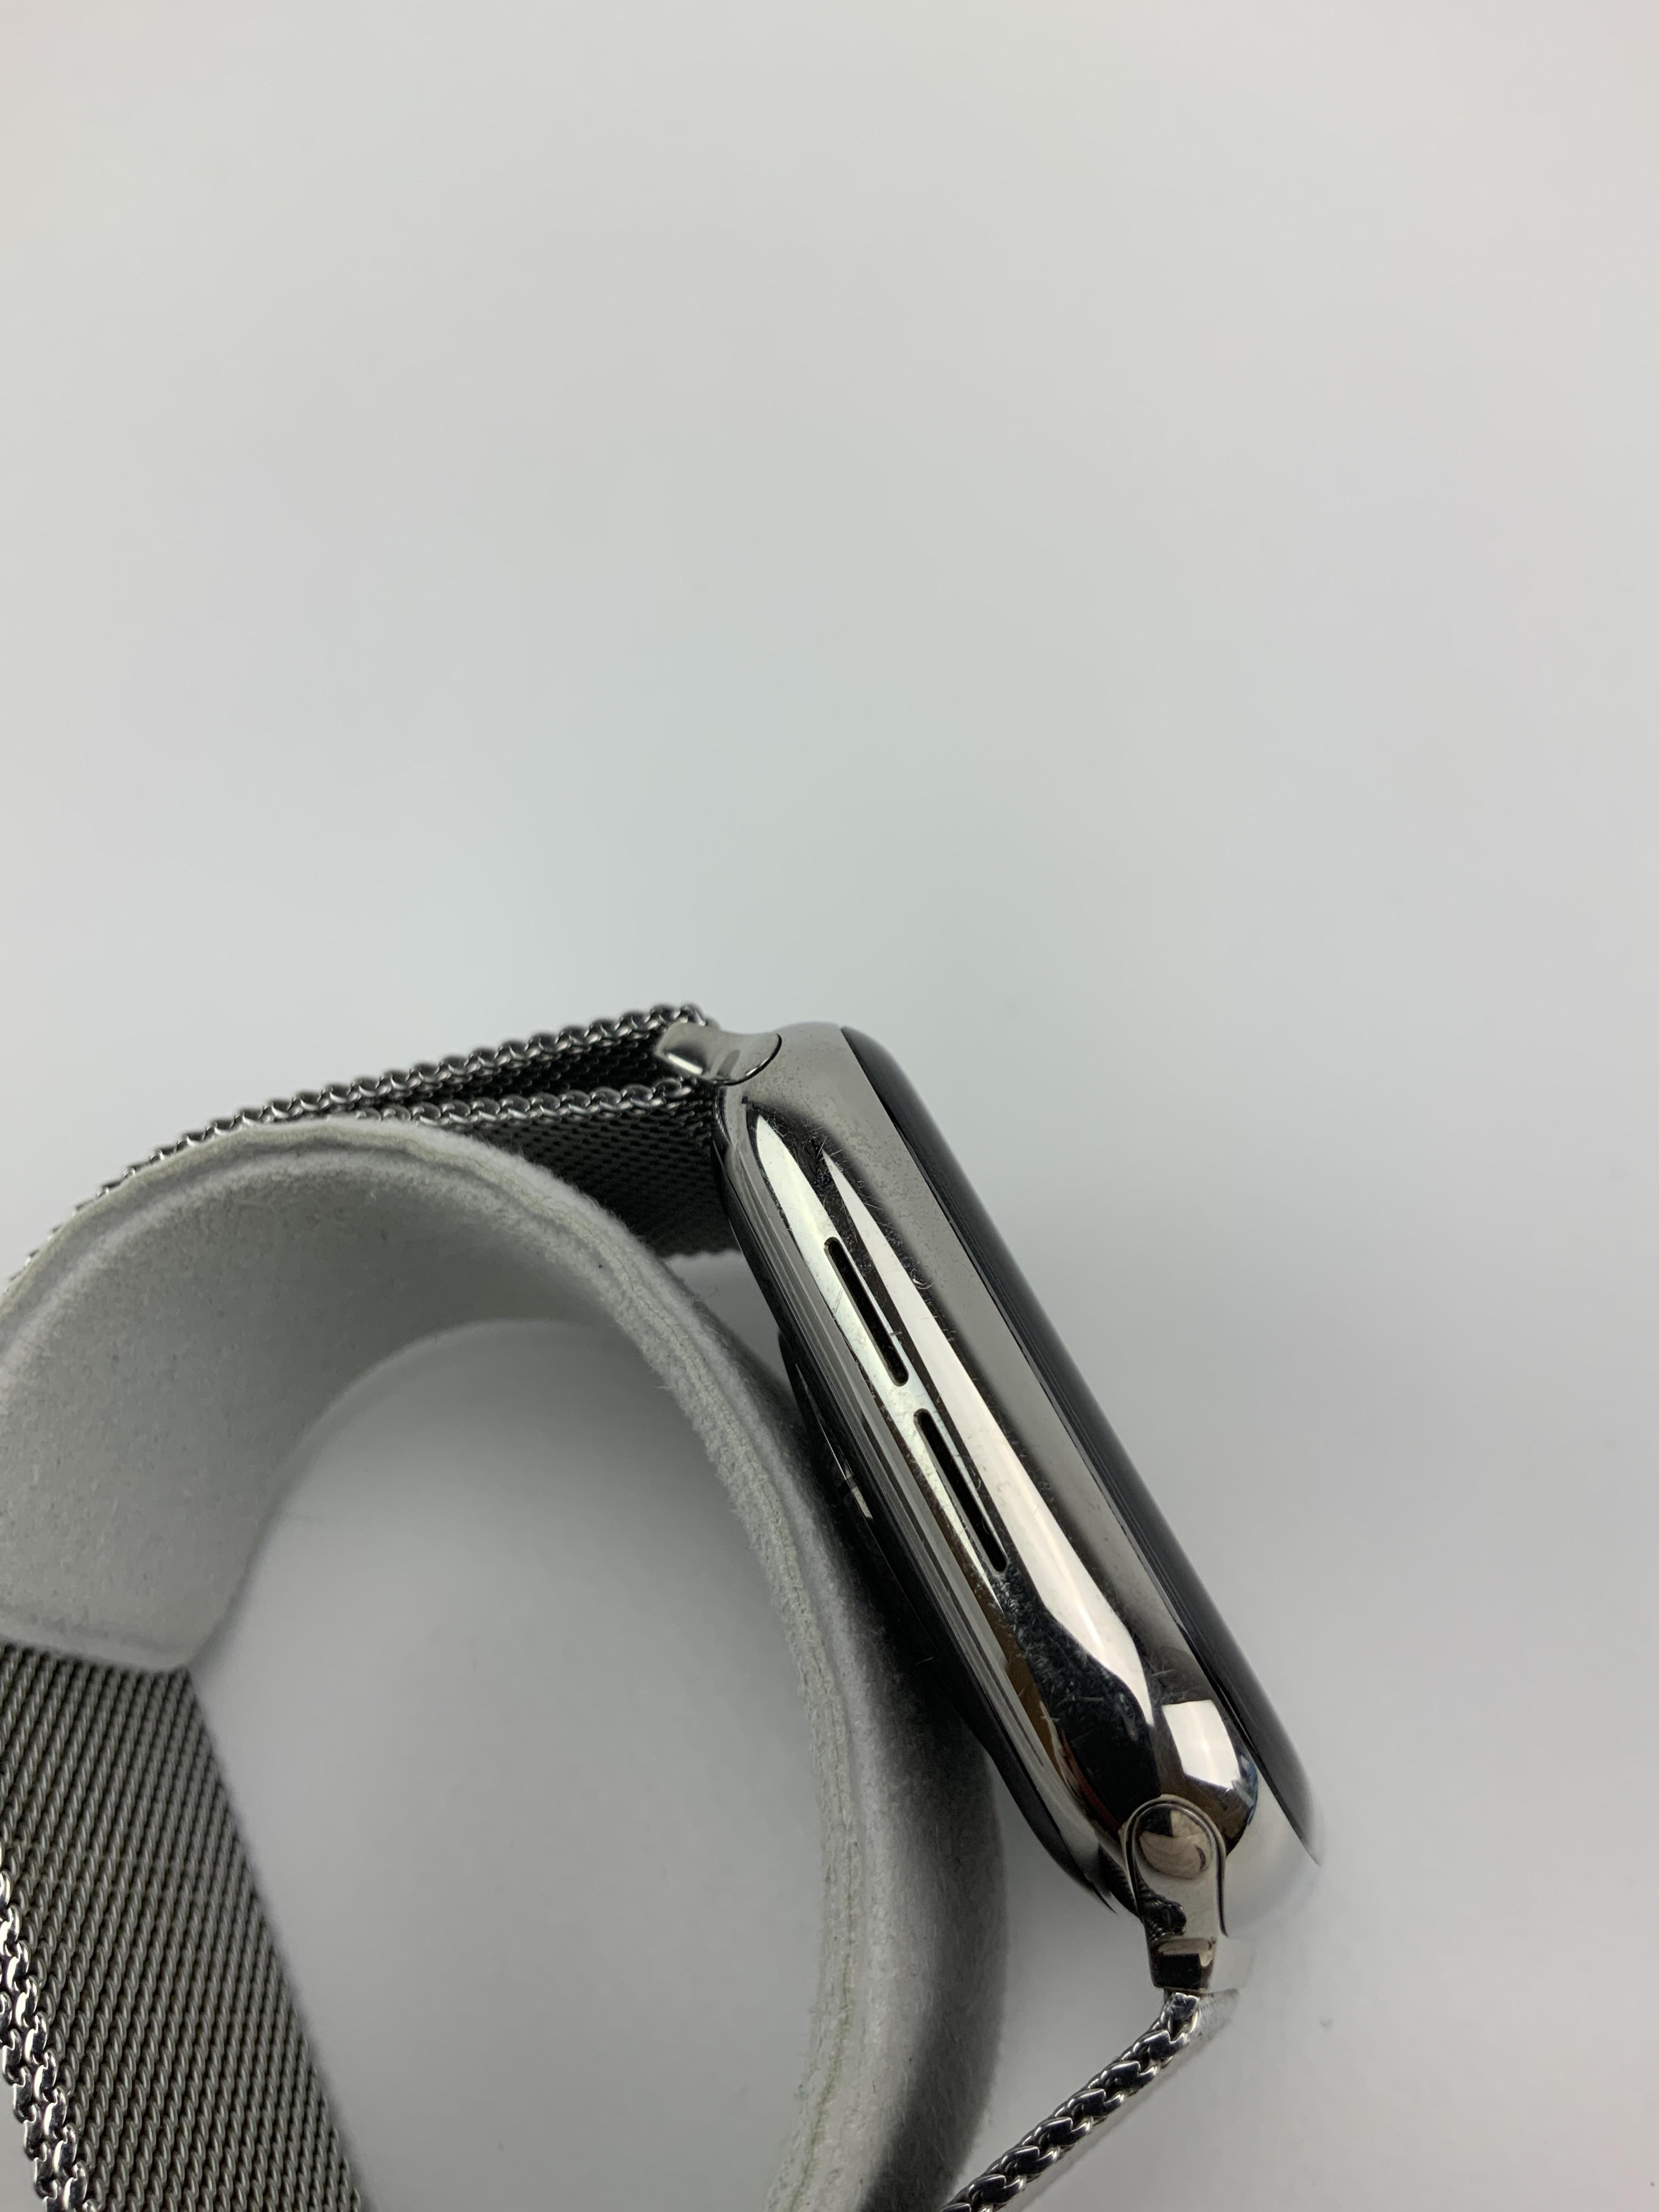 Watch Series 5 Steel Cellular (44mm), Silver, image 4